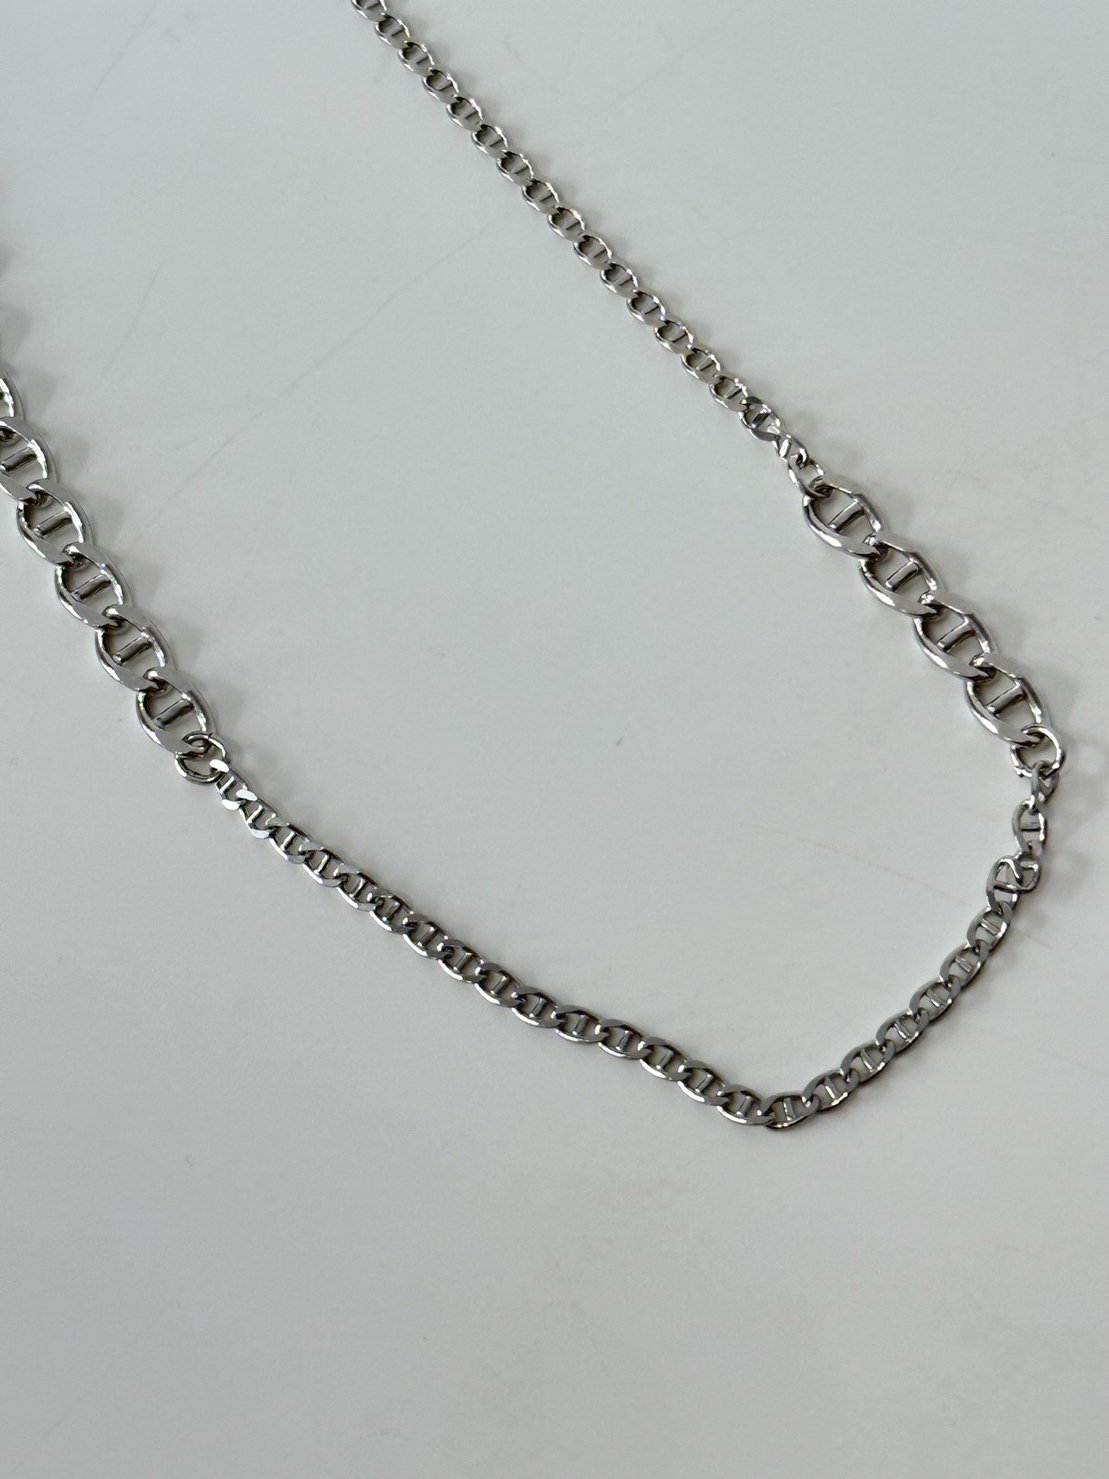 LITTLEBIG<br />Chain Necklace 1 / Silver<img class='new_mark_img2' src='https://img.shop-pro.jp/img/new/icons14.gif' style='border:none;display:inline;margin:0px;padding:0px;width:auto;' />